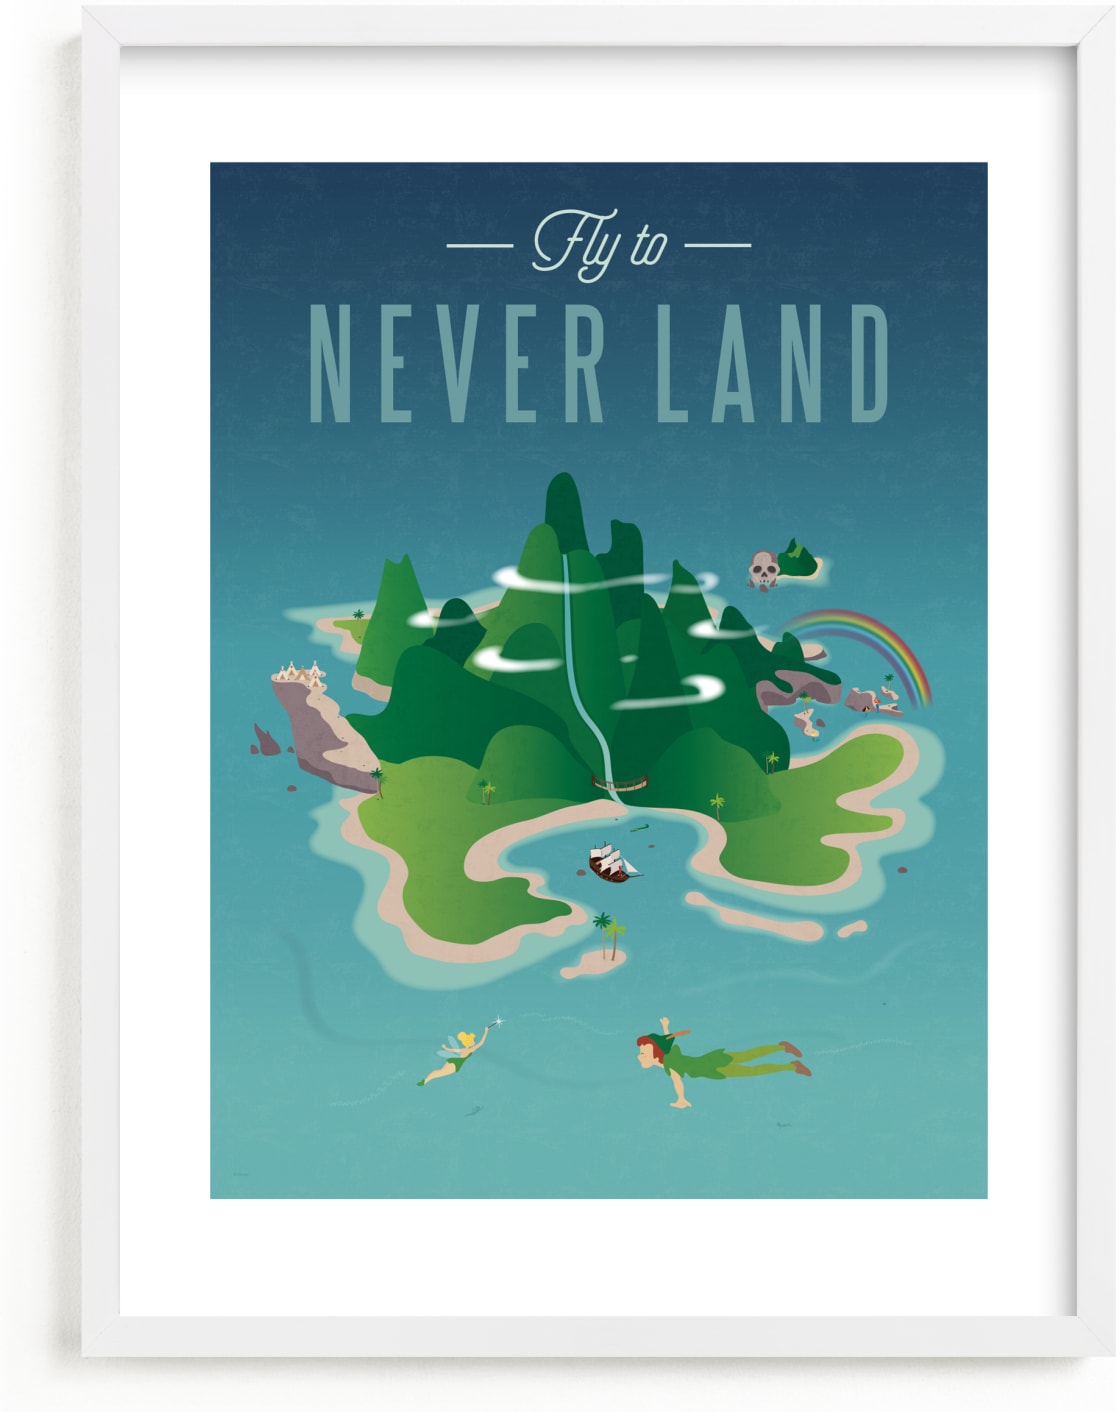 This is a blue disney art by Erica Krystek called Fly To Never Land from Disney's Peter Pan.